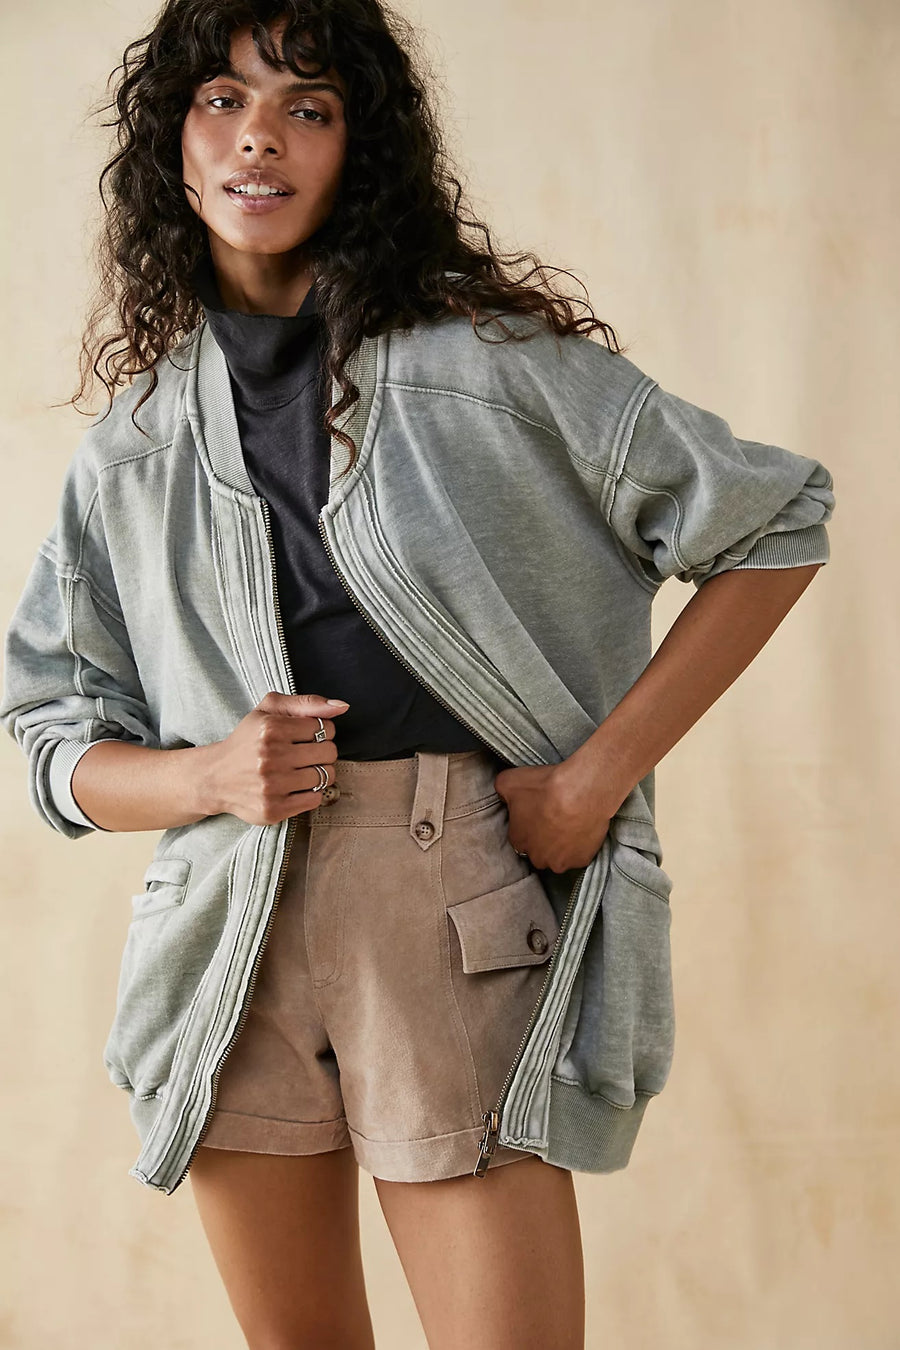 Free People Robby Bomber - Washed Army